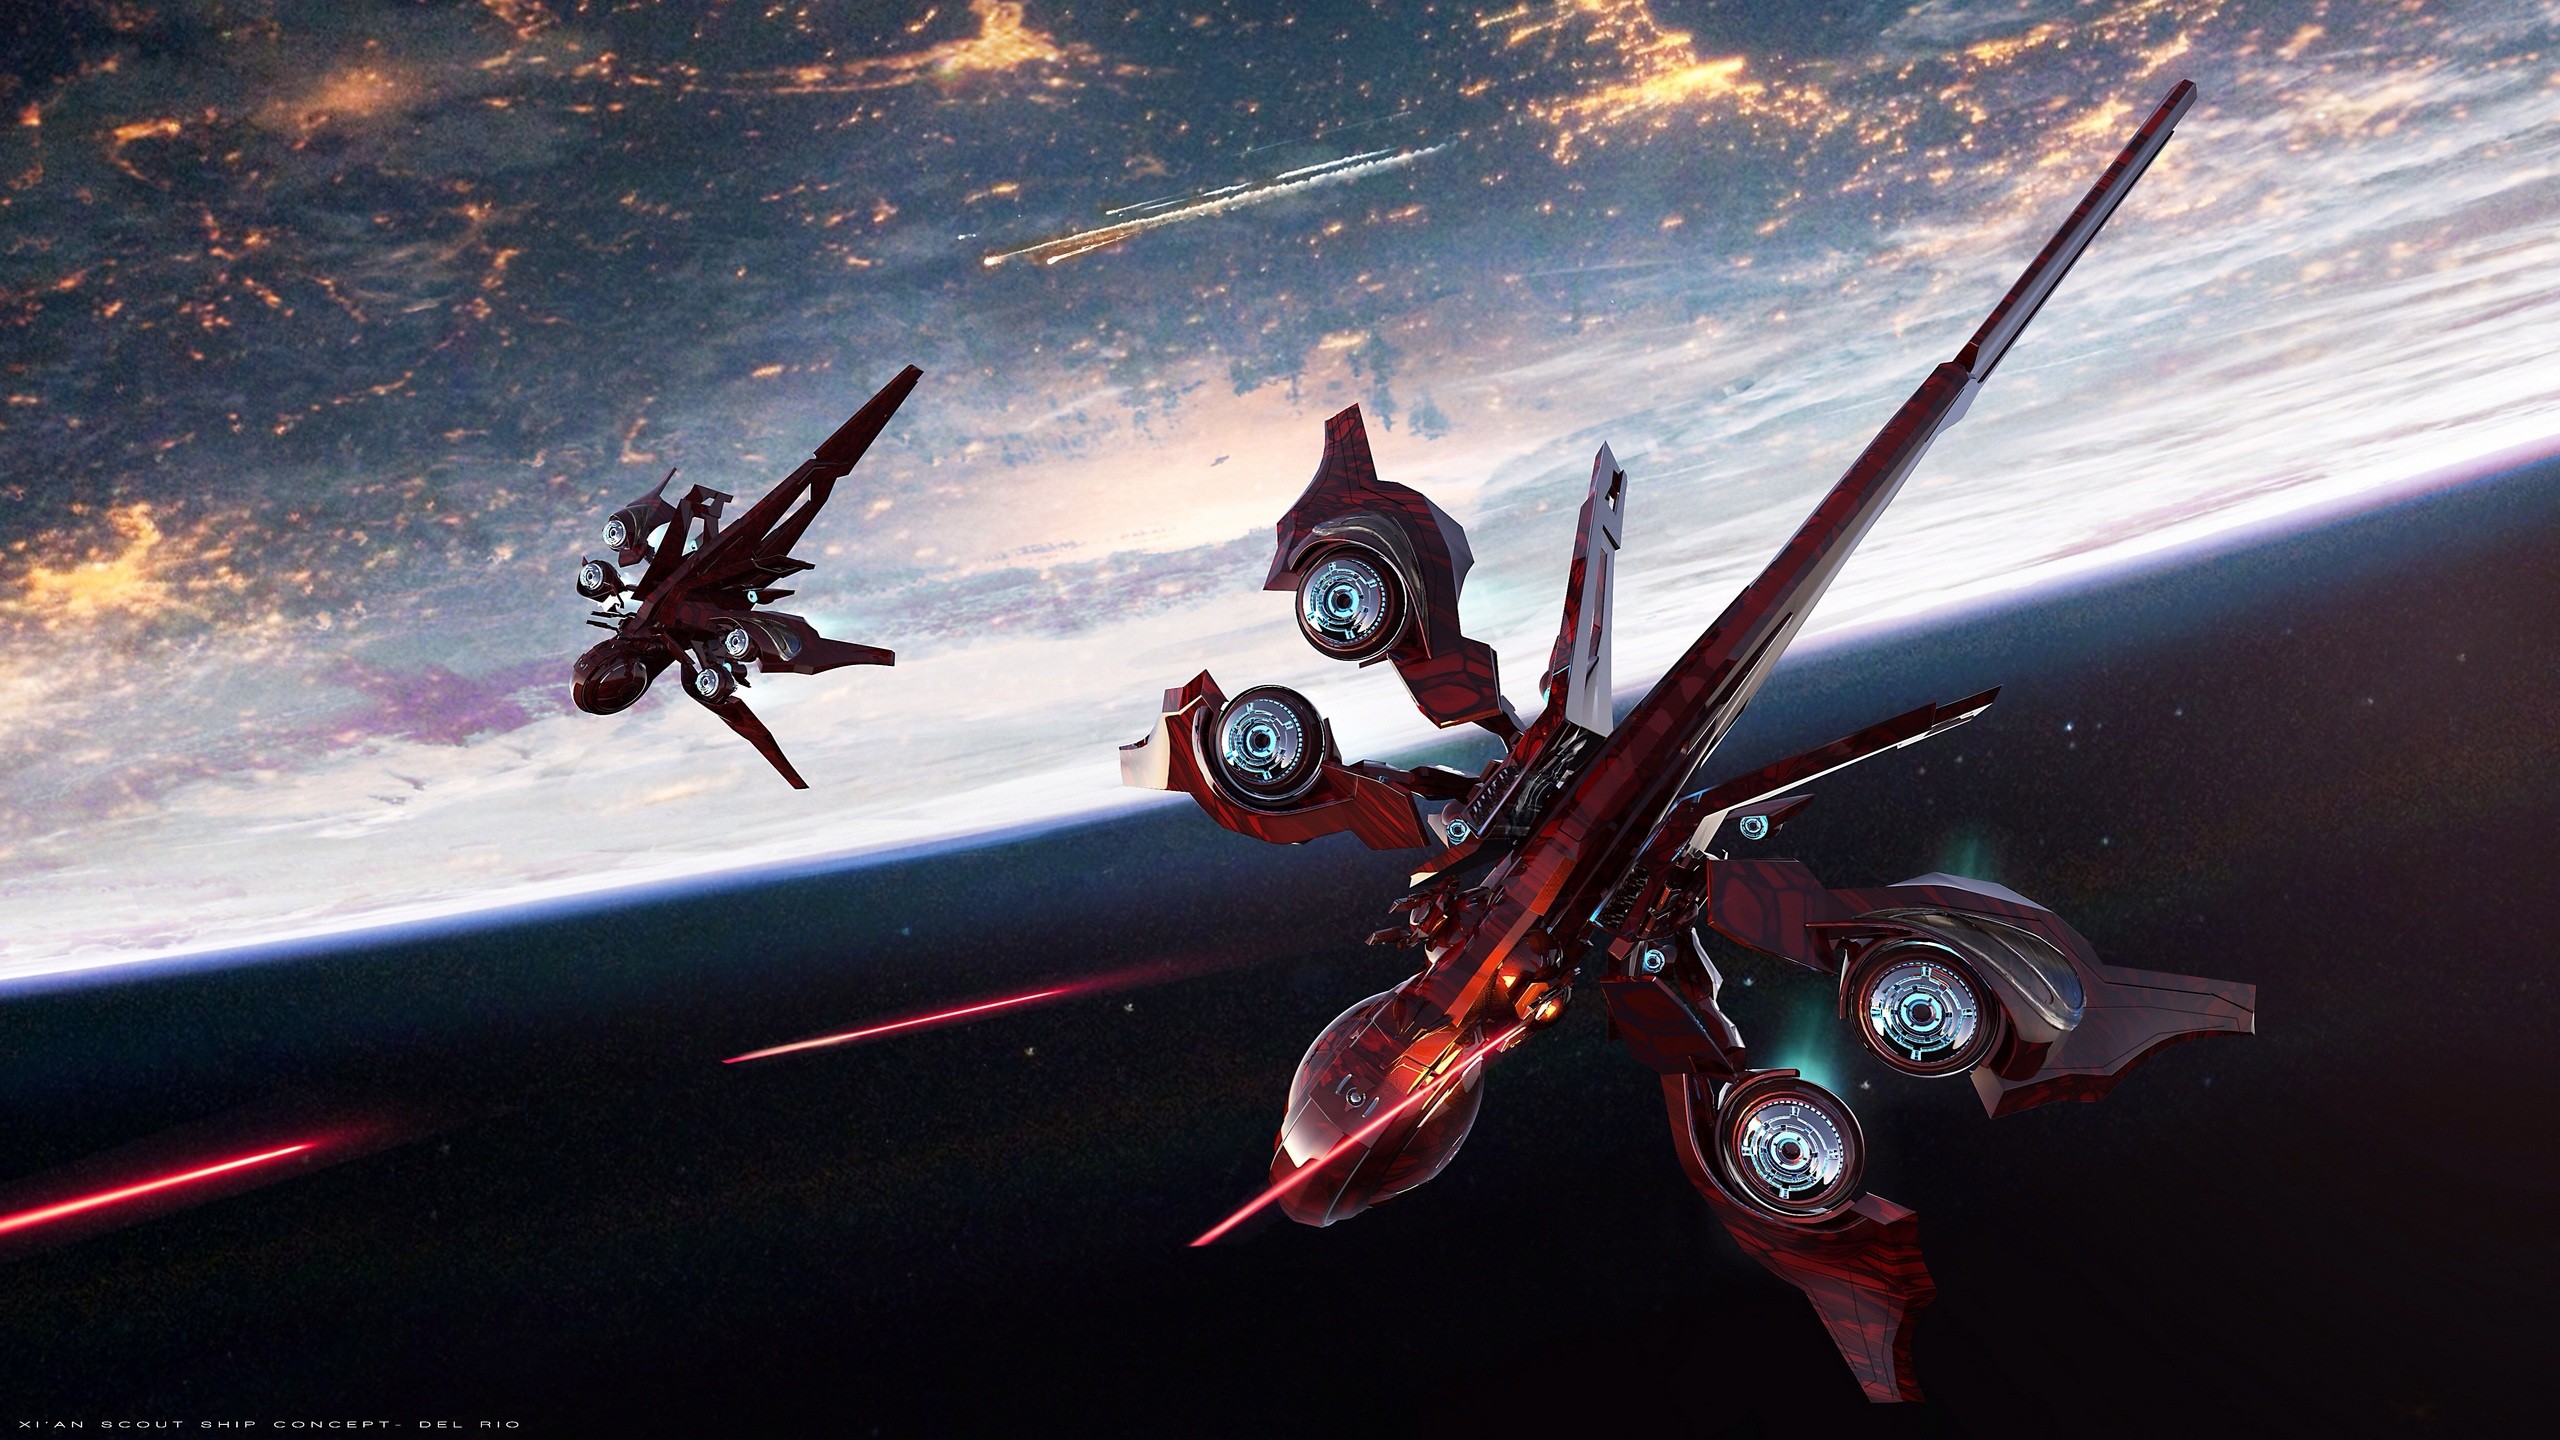 General 2560x1440 Star Citizen spaceship space video games PC gaming concept art science fiction vehicle